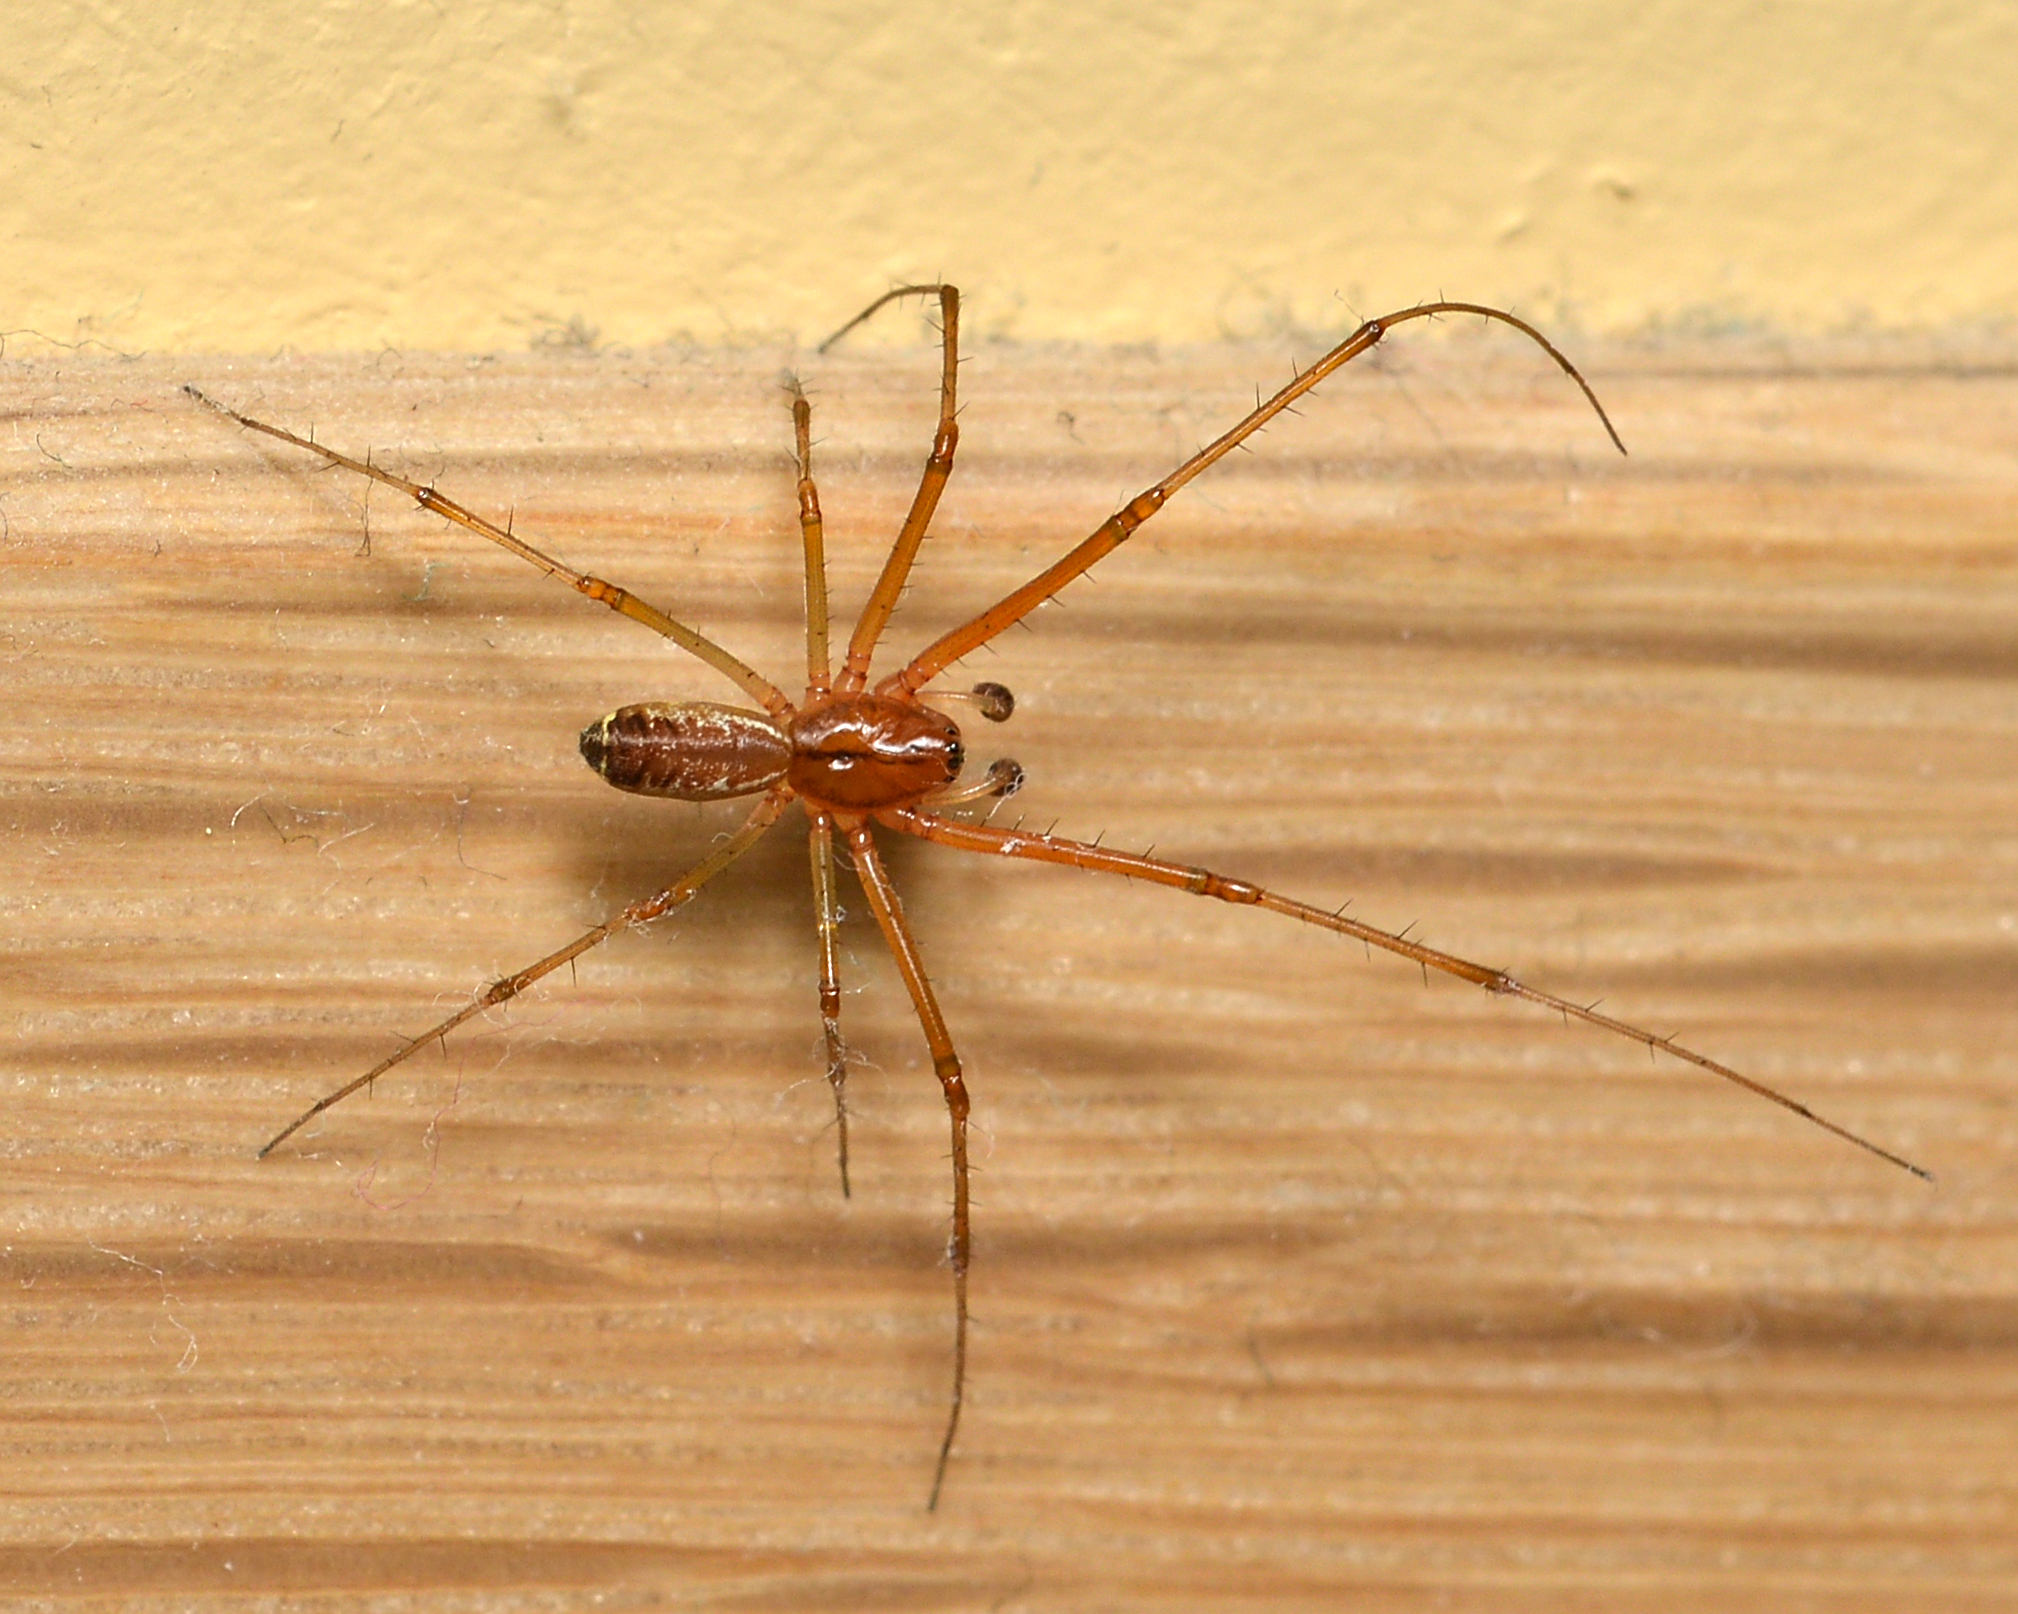 File:Common house spider and web.JPG - Wikipedia